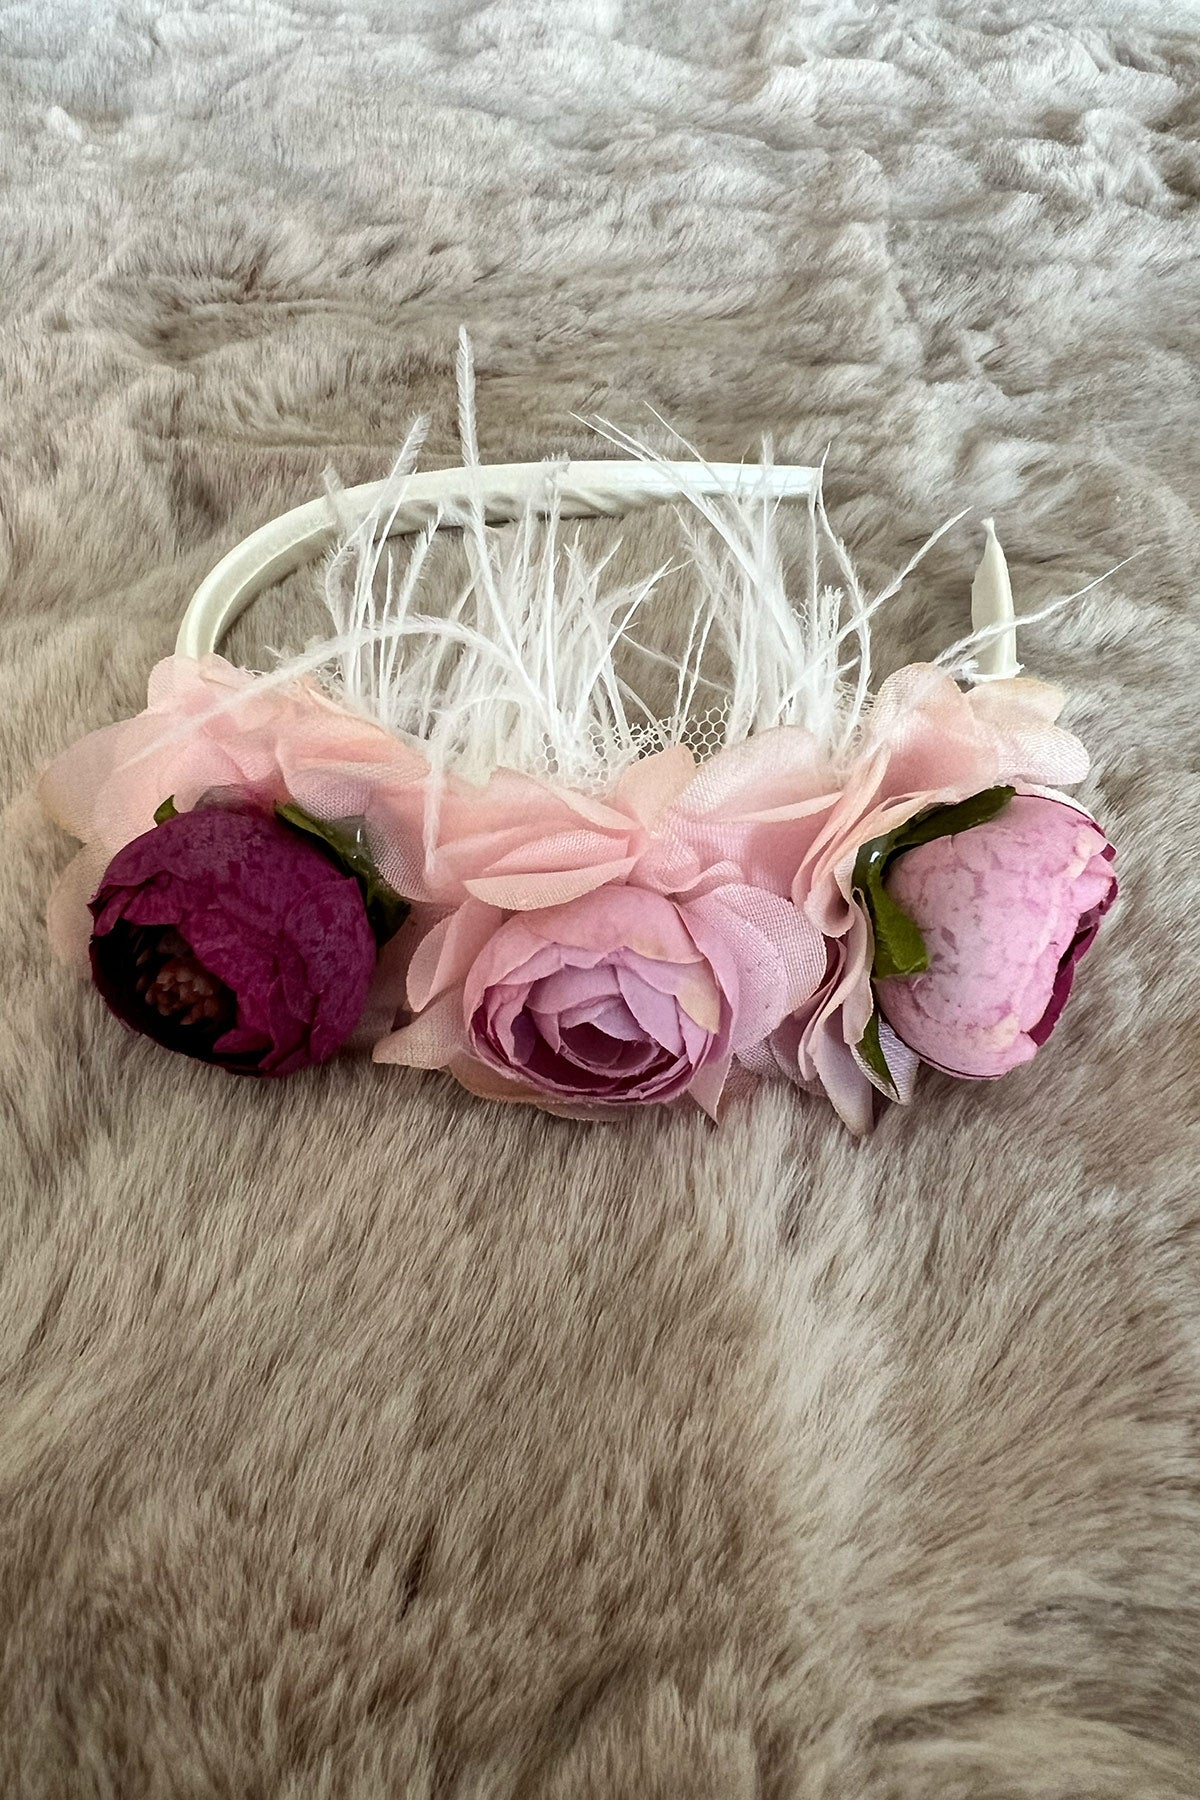 Shopymommy 71009 Rose Themed Maternity Crown Dried Rose